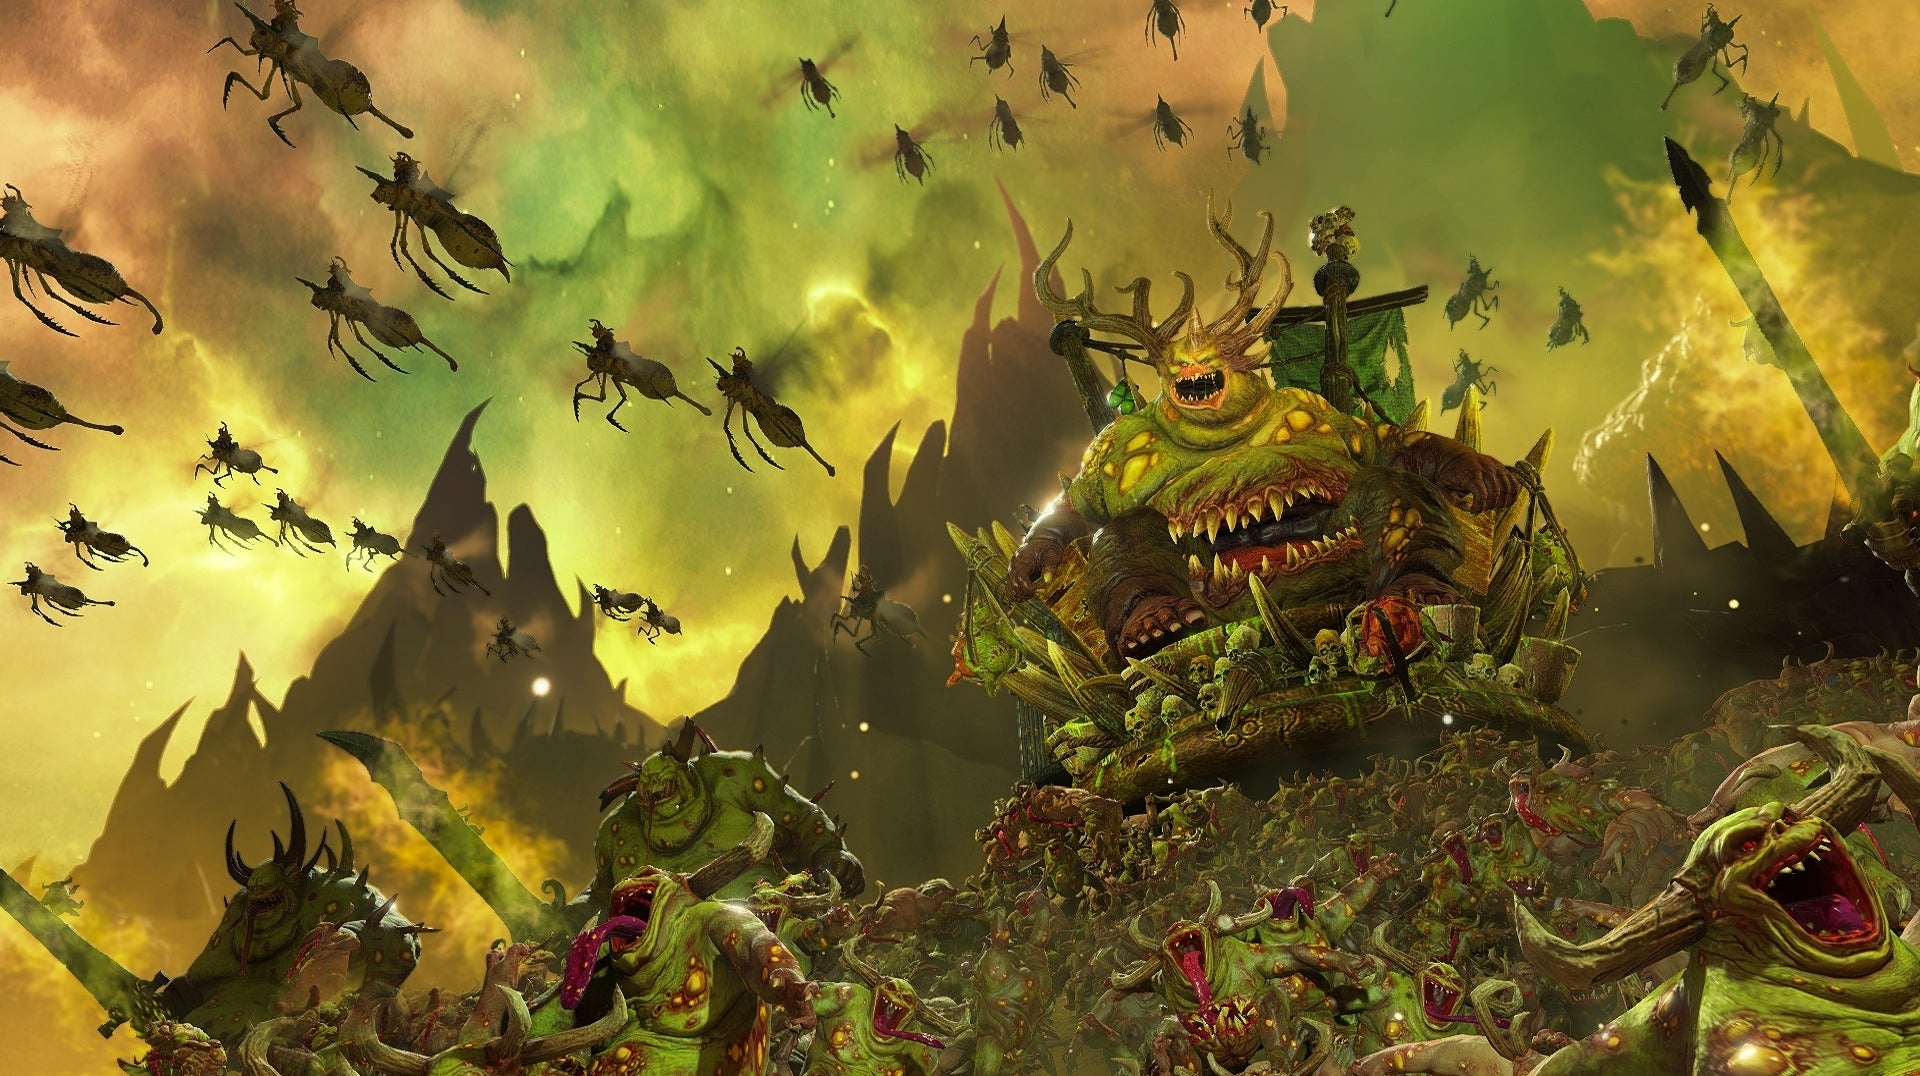 Image for Nurgle looks like the reason for me to play Total War Warhammer 3